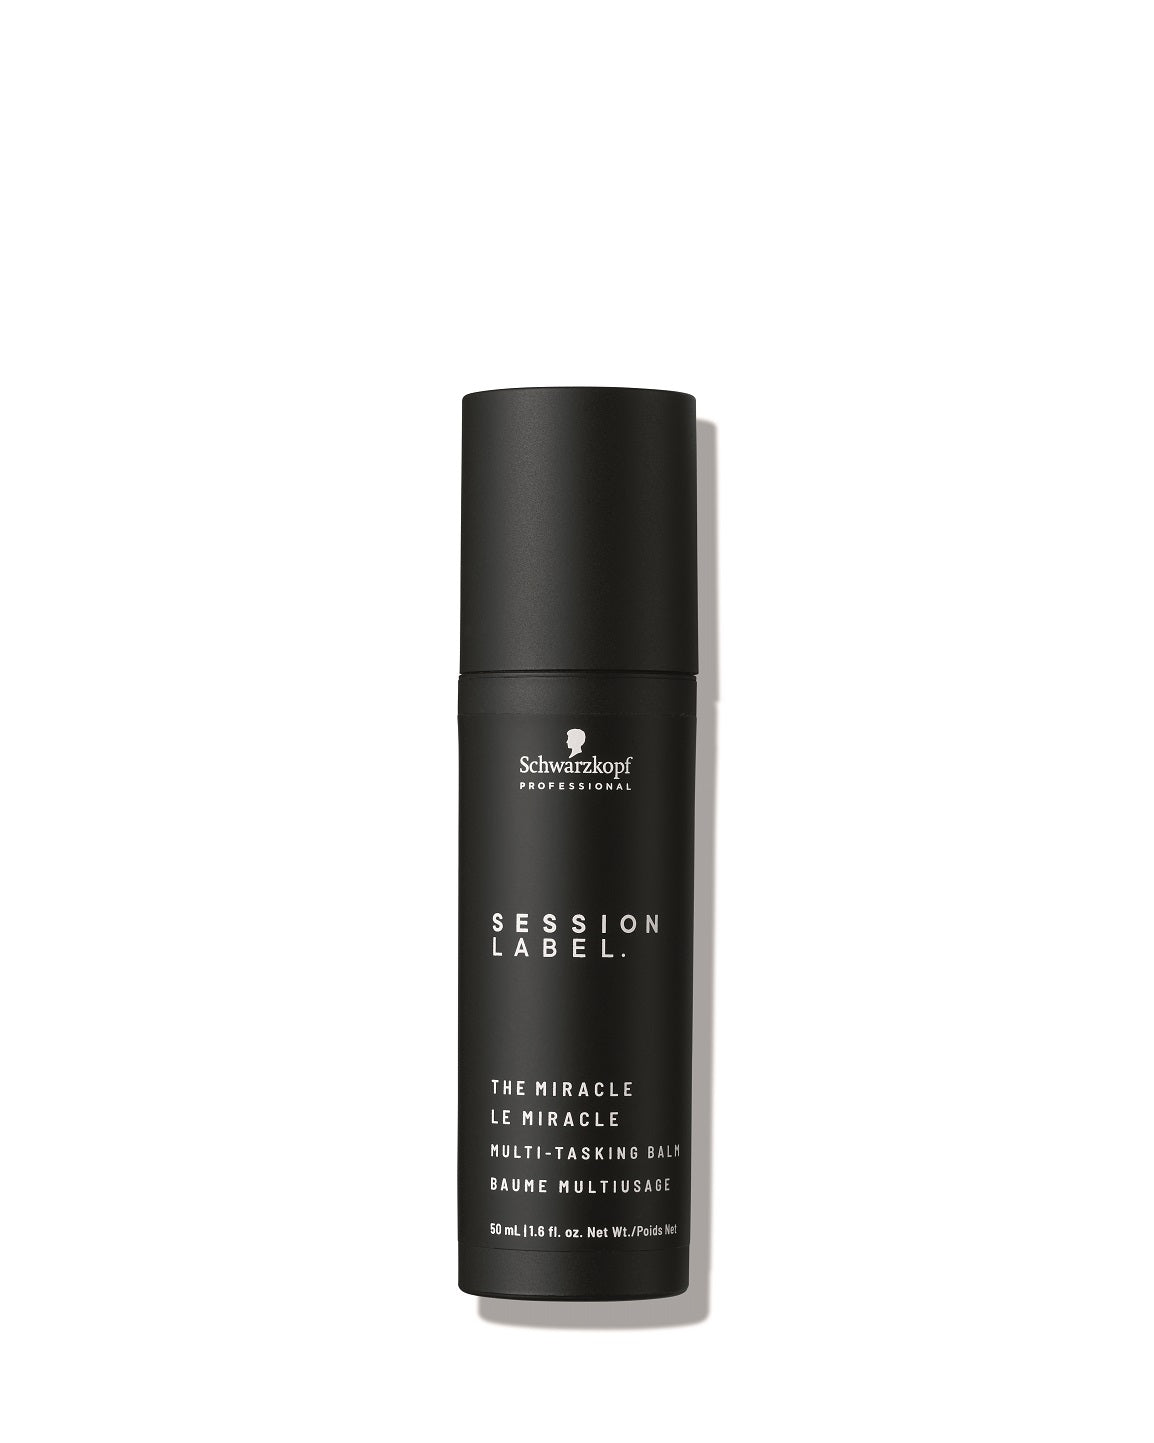 Schwarzkopf Professional - Session Label The Miracle - Eds Hair Bramhall